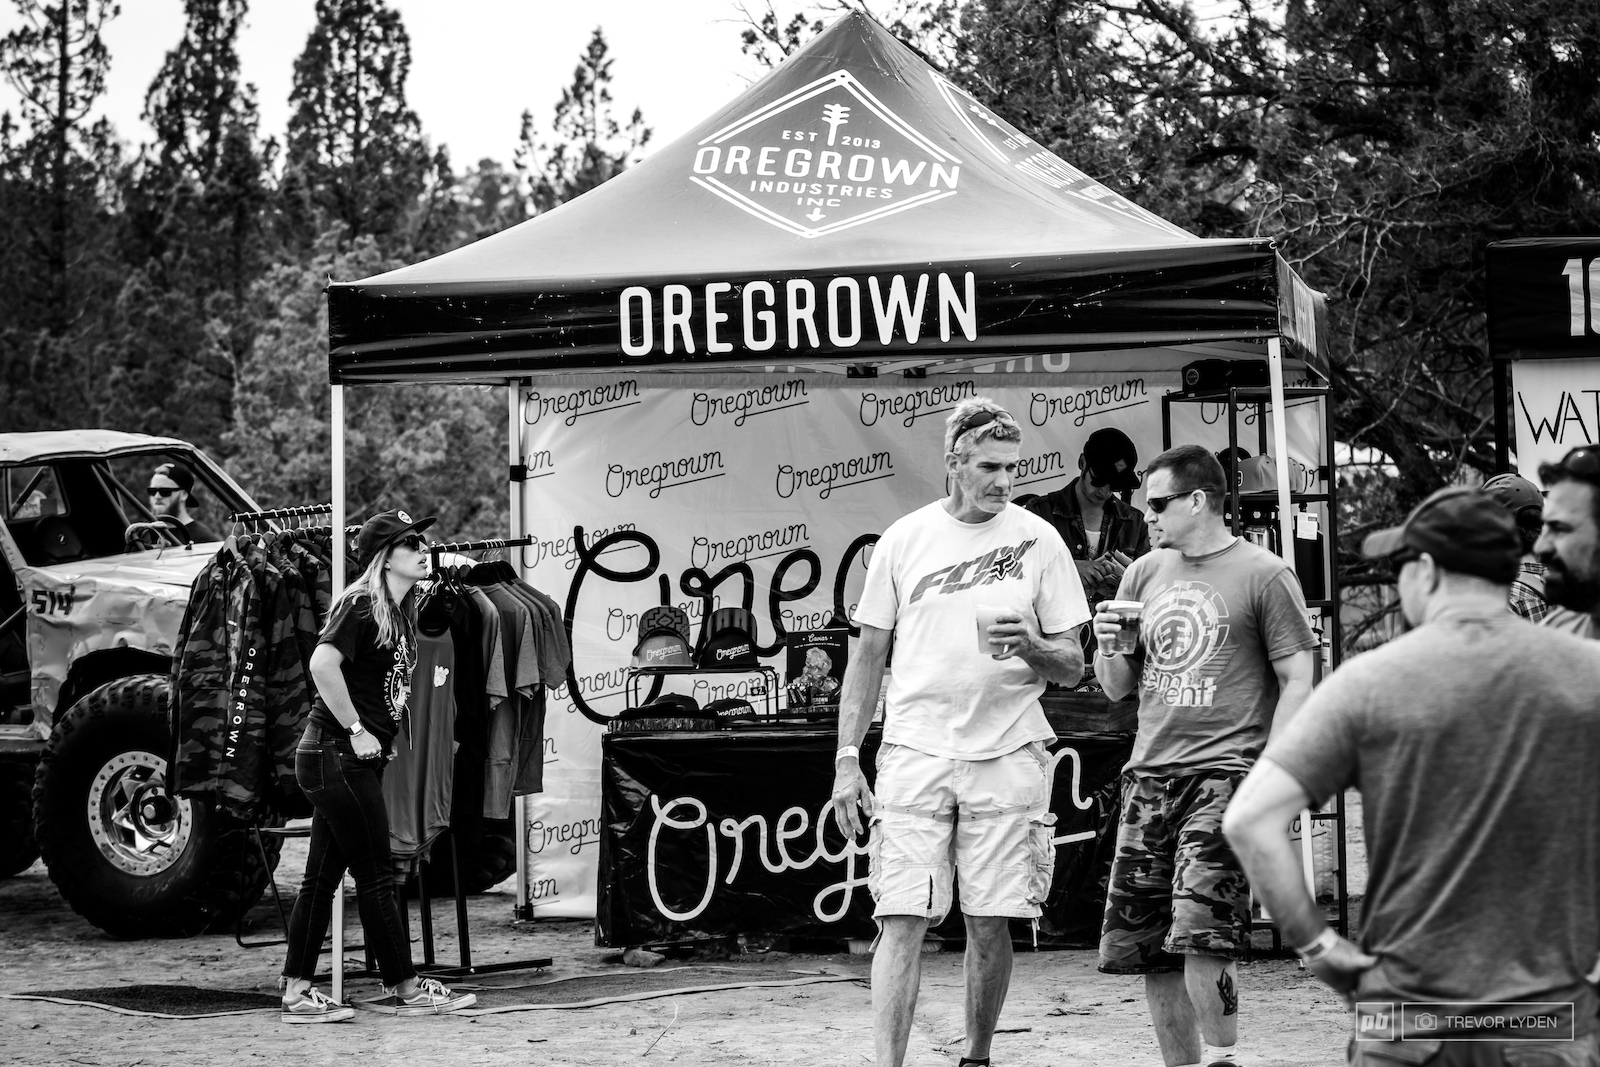 Bend based dispensary and clothing company Oregrown was another large sponsor for the event.